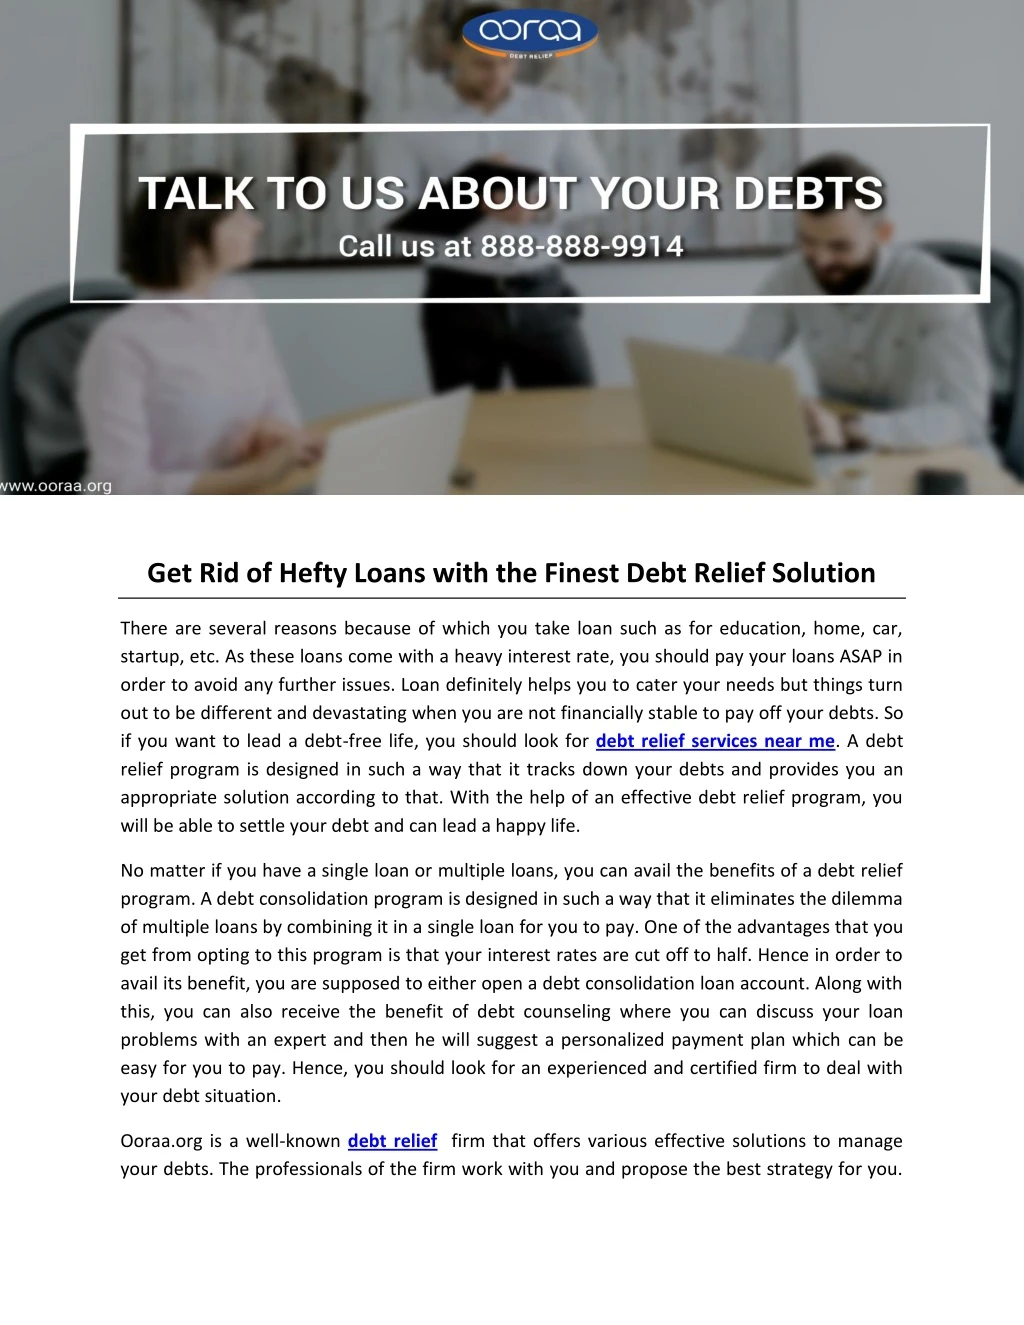 get rid of hefty loans with the finest debt